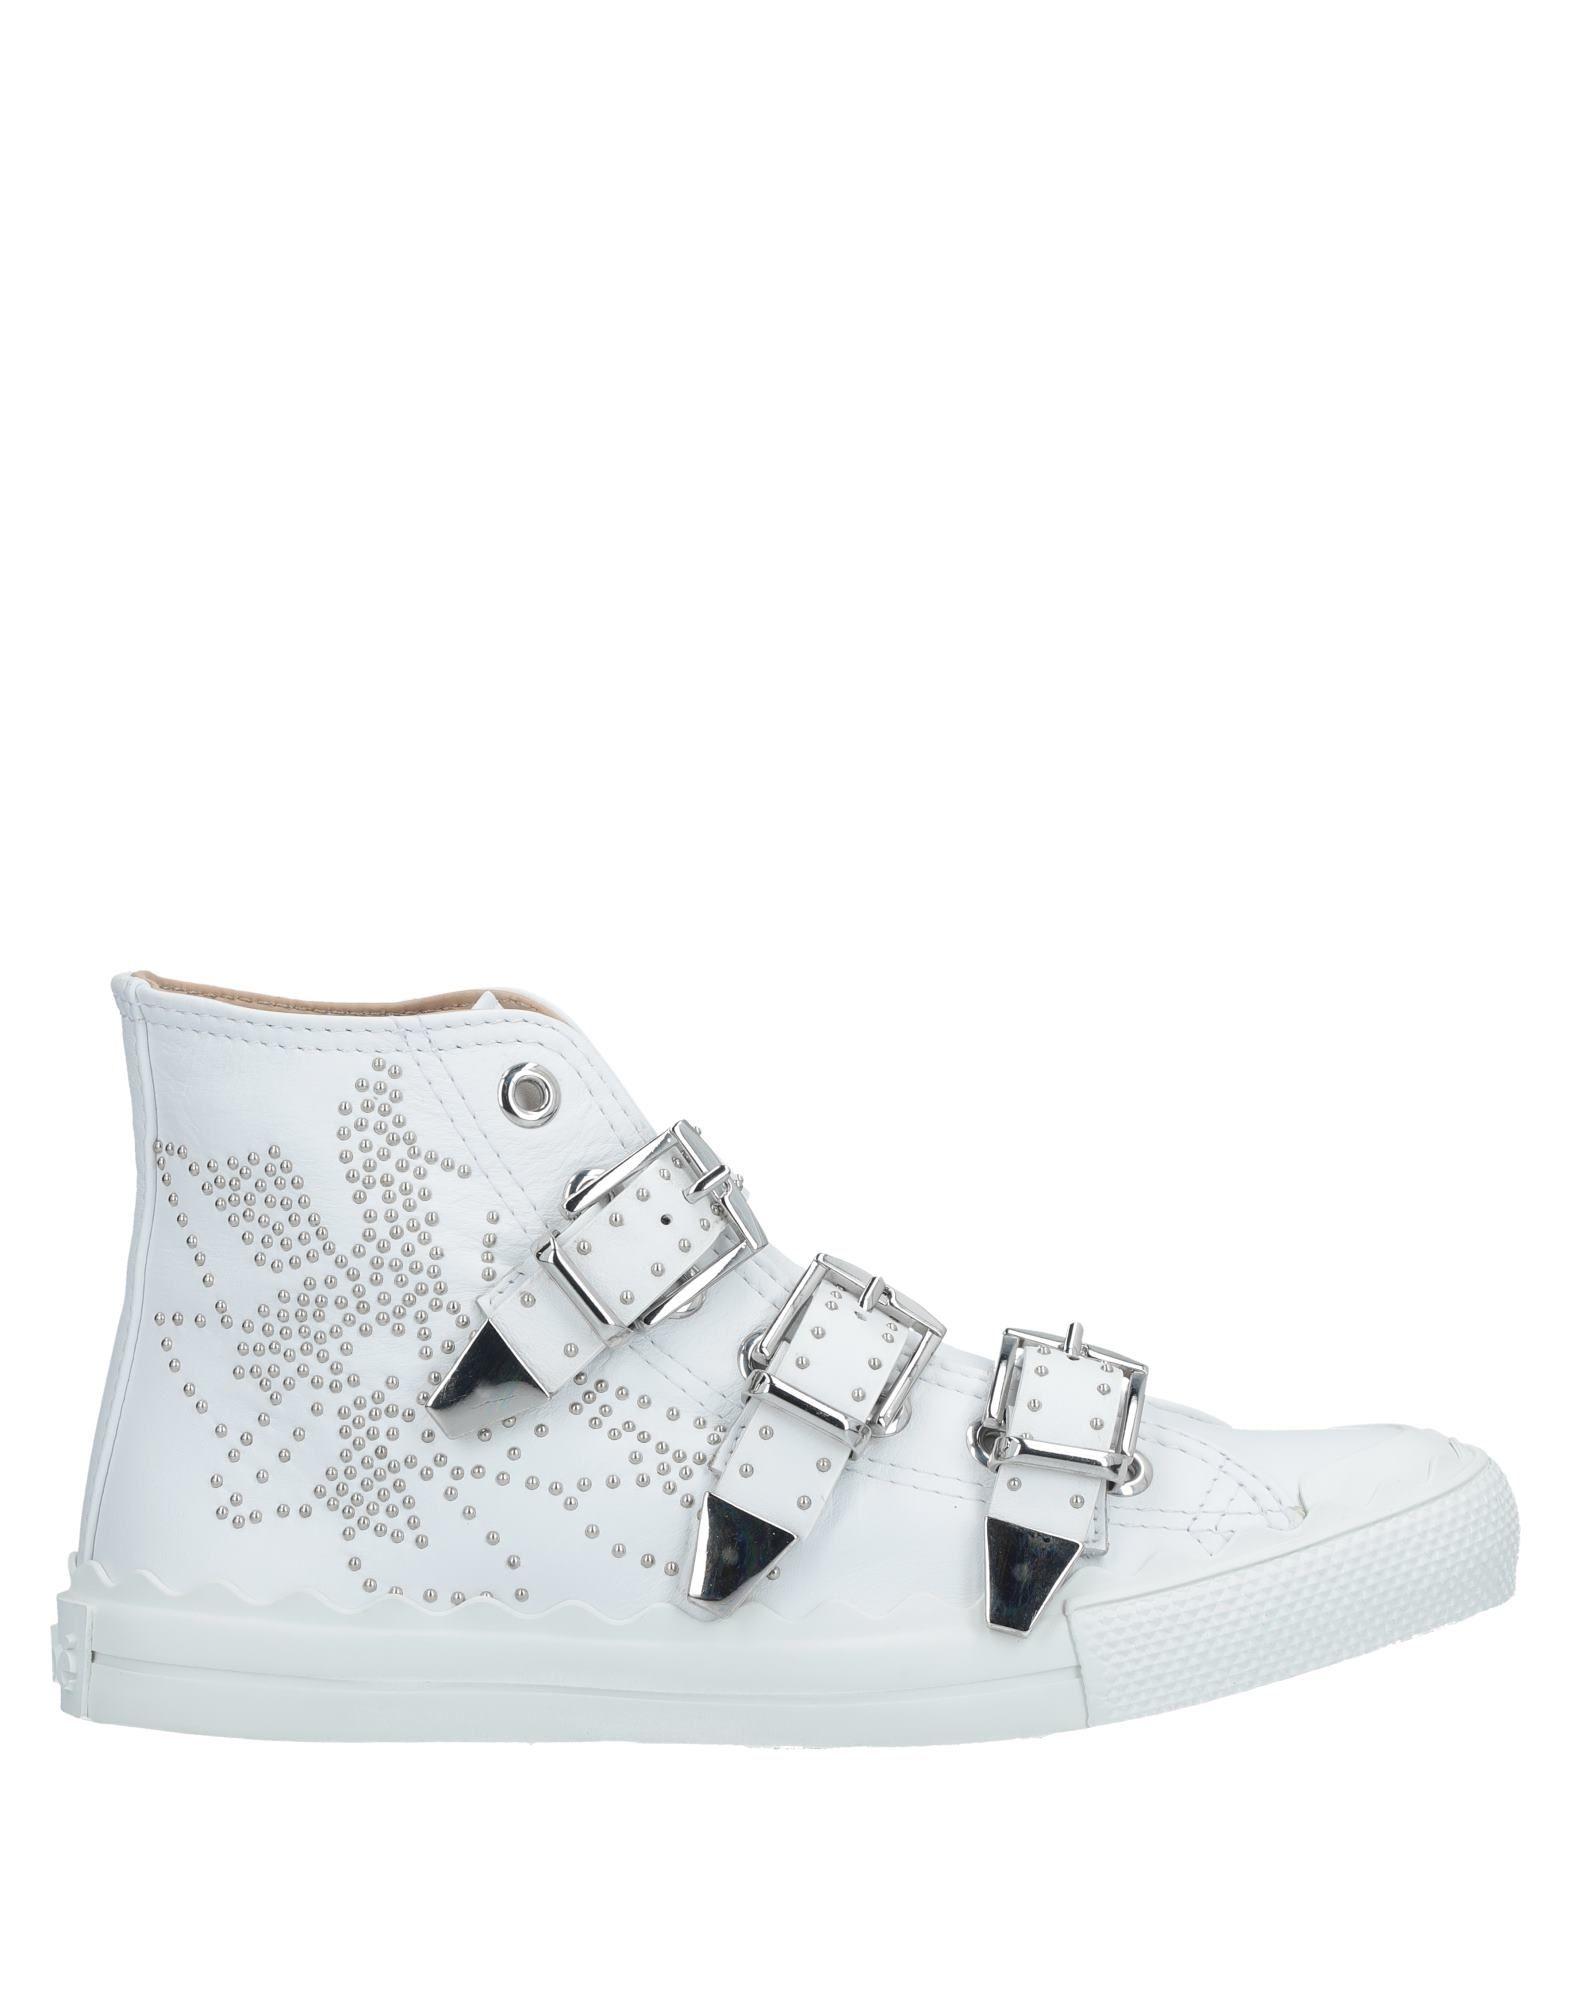 Chloé Chloe Kyle Semi-shiny Calf Leather Buckle Sneakers In White | ModeSens